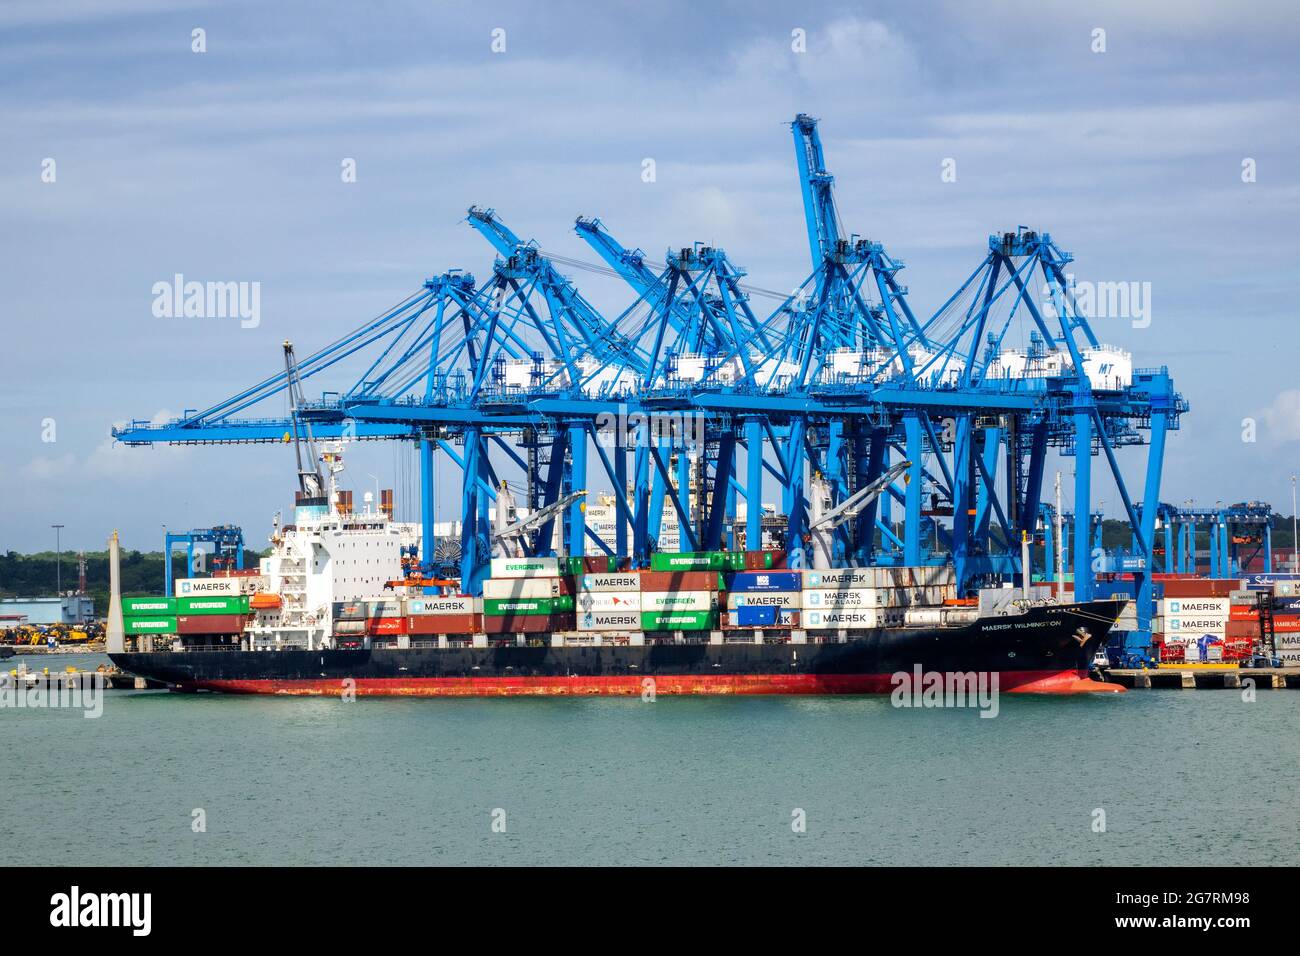 Maersk Wilmington Container Cargo Ship In Port Colon Republic Of Panama Against A Background Of Cranes Stock Photo